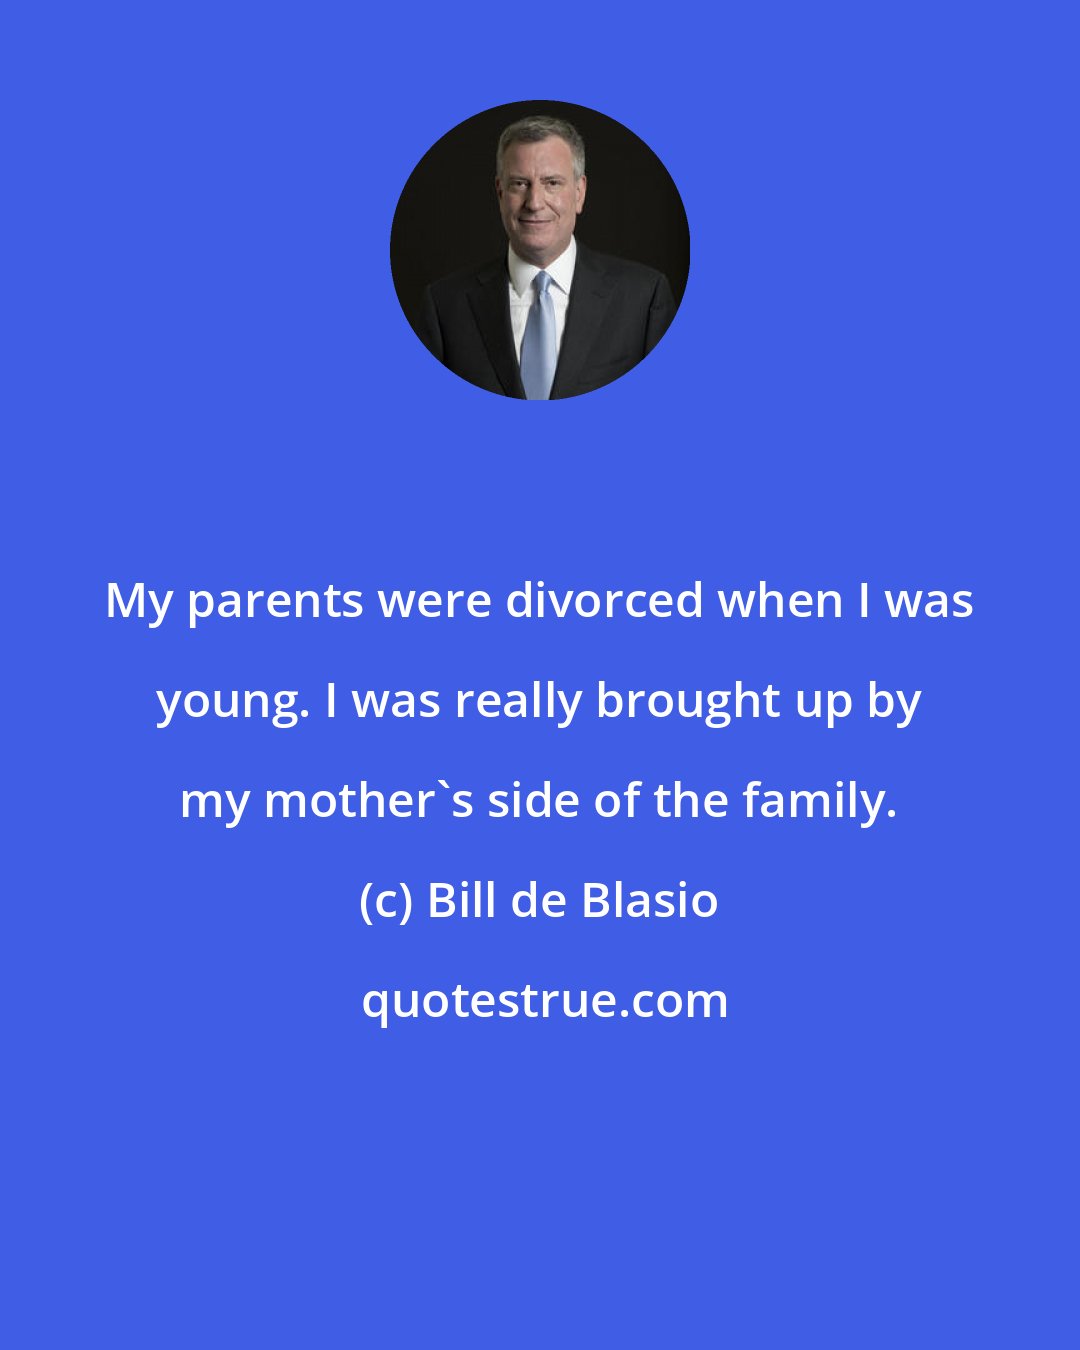 Bill de Blasio: My parents were divorced when I was young. I was really brought up by my mother's side of the family.